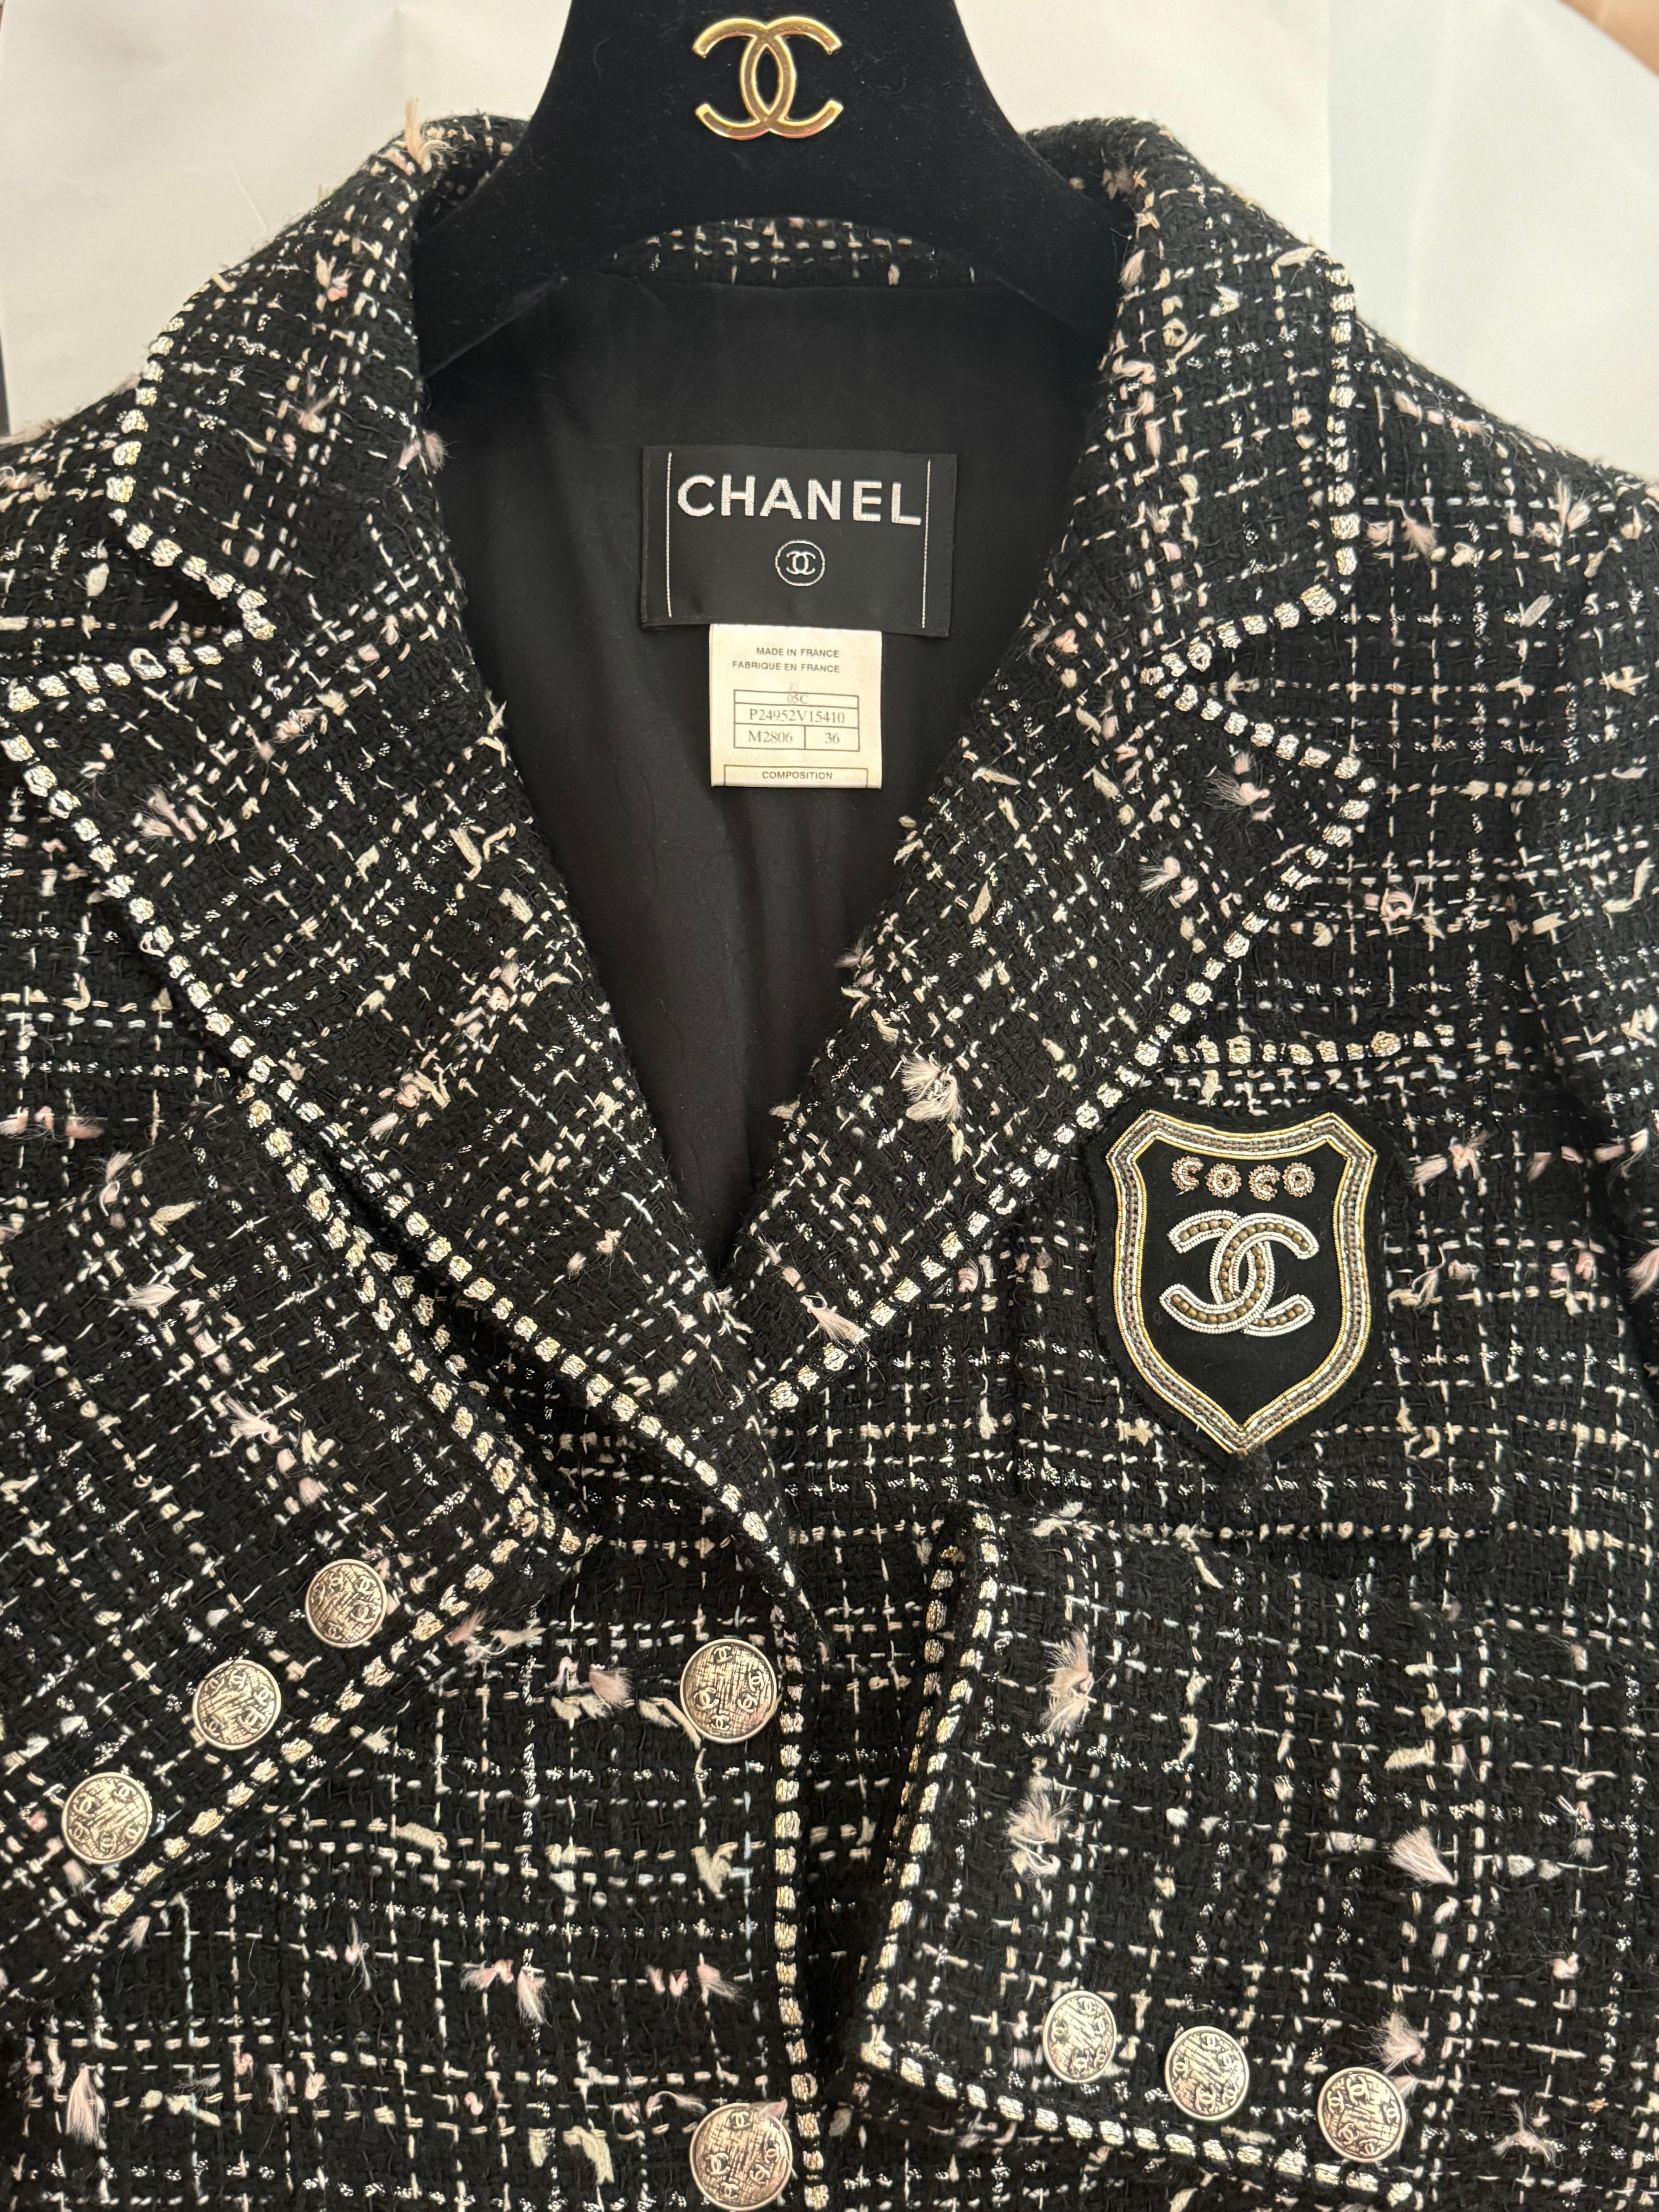 Rare Chanel Cruise 2005 jacket size 36 FR the devil wears prada movie jacket, CC logo coco patch and tweed with gold and silver details, cc logo buttons, fits 0,2,4 US